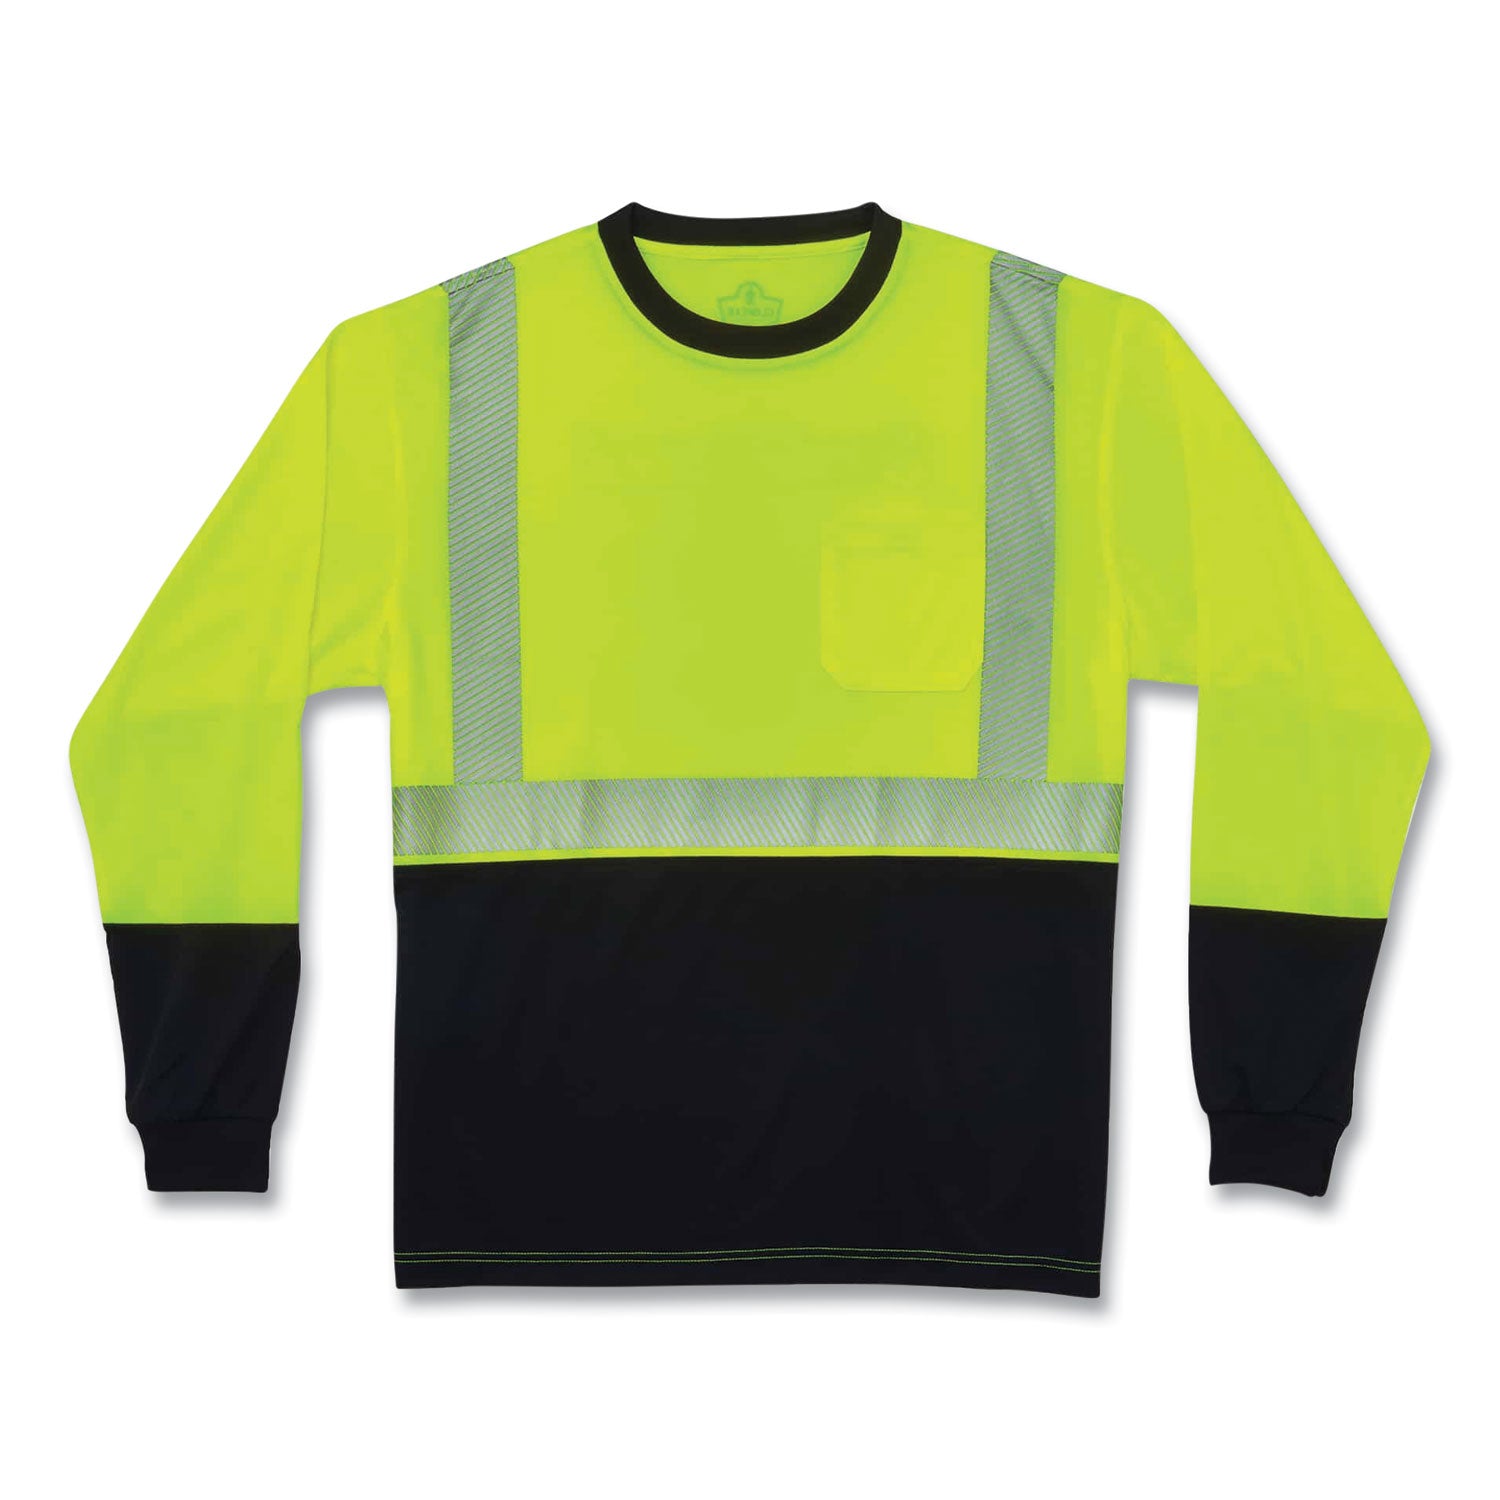 glowear-8281bk-class-2-long-sleeve-shirt-with-black-bottom-polyester-large-lime-ships-in-1-3-business-days_ego22634 - 1